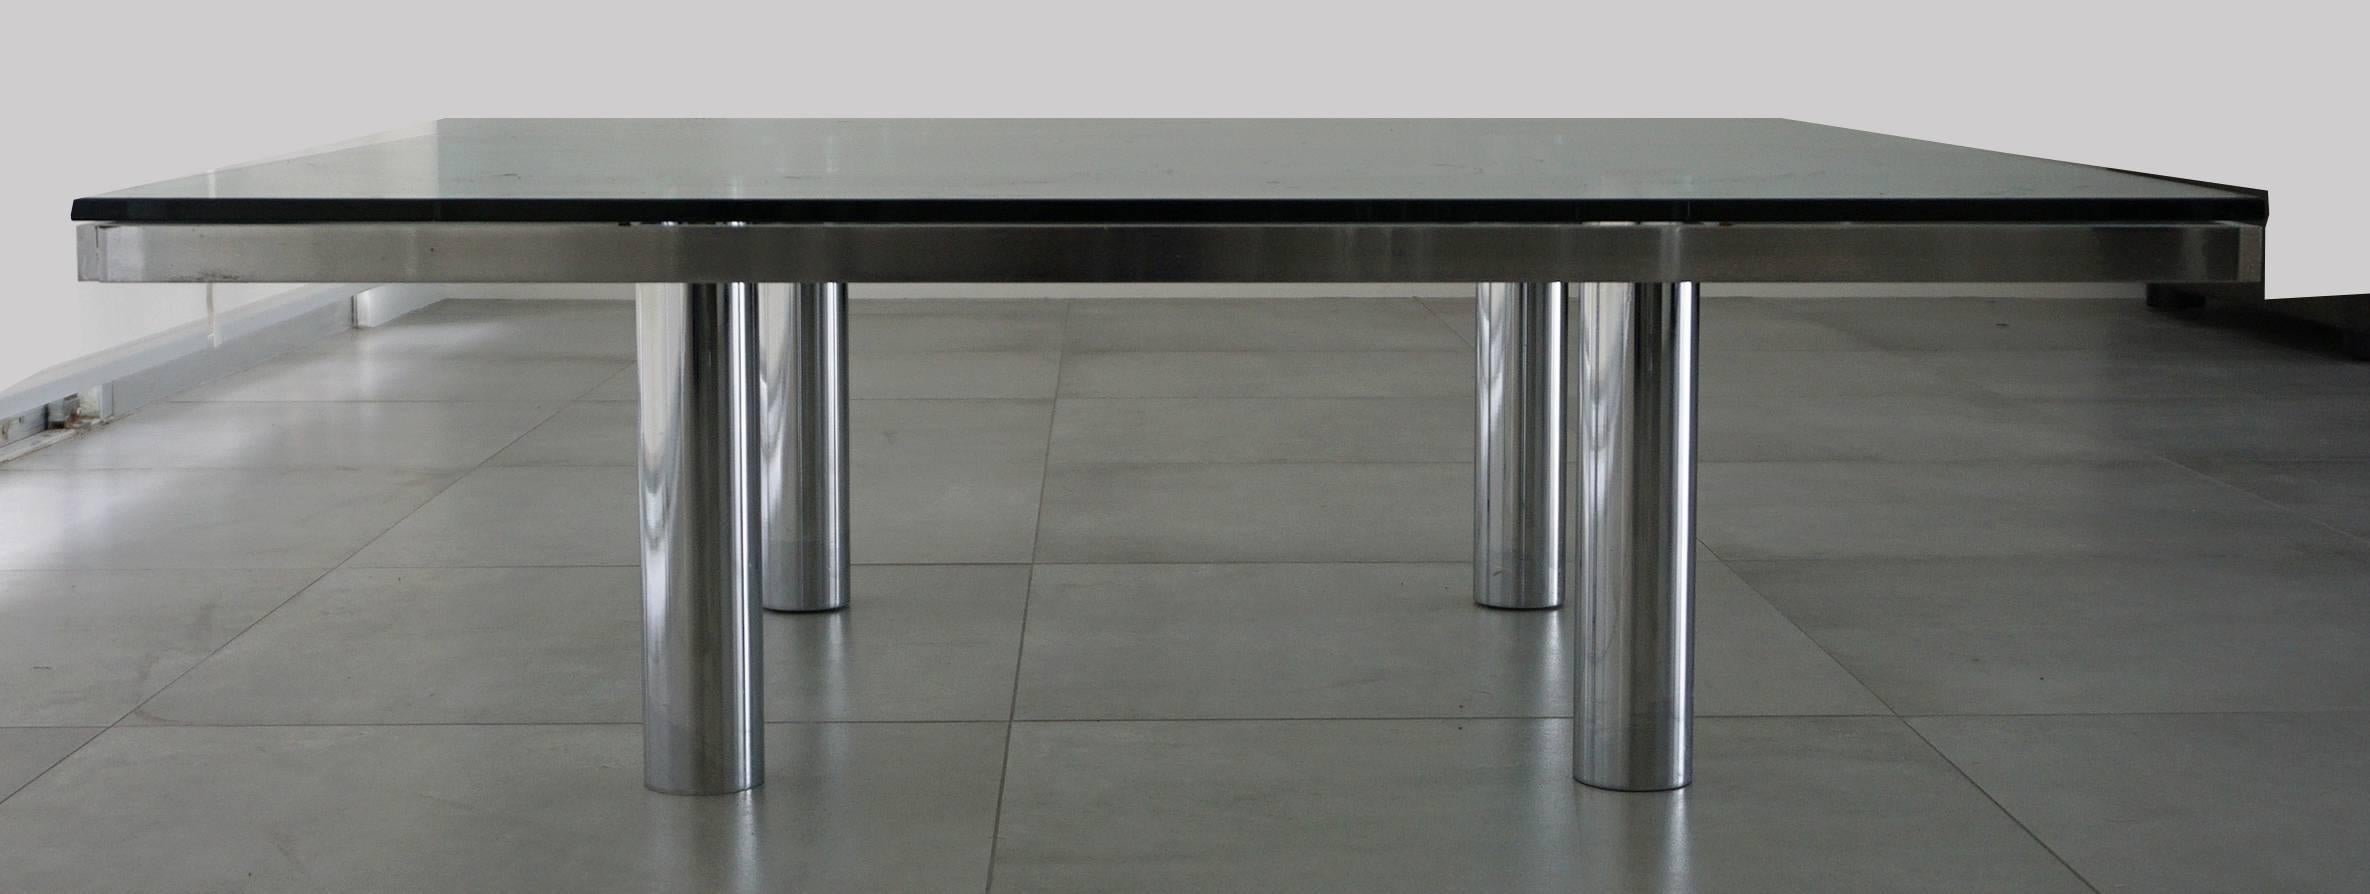 André Tobias Scarpa gavina coffee table 1960s. Glass on chrome base with leather Inlays missing one disc under one foot.